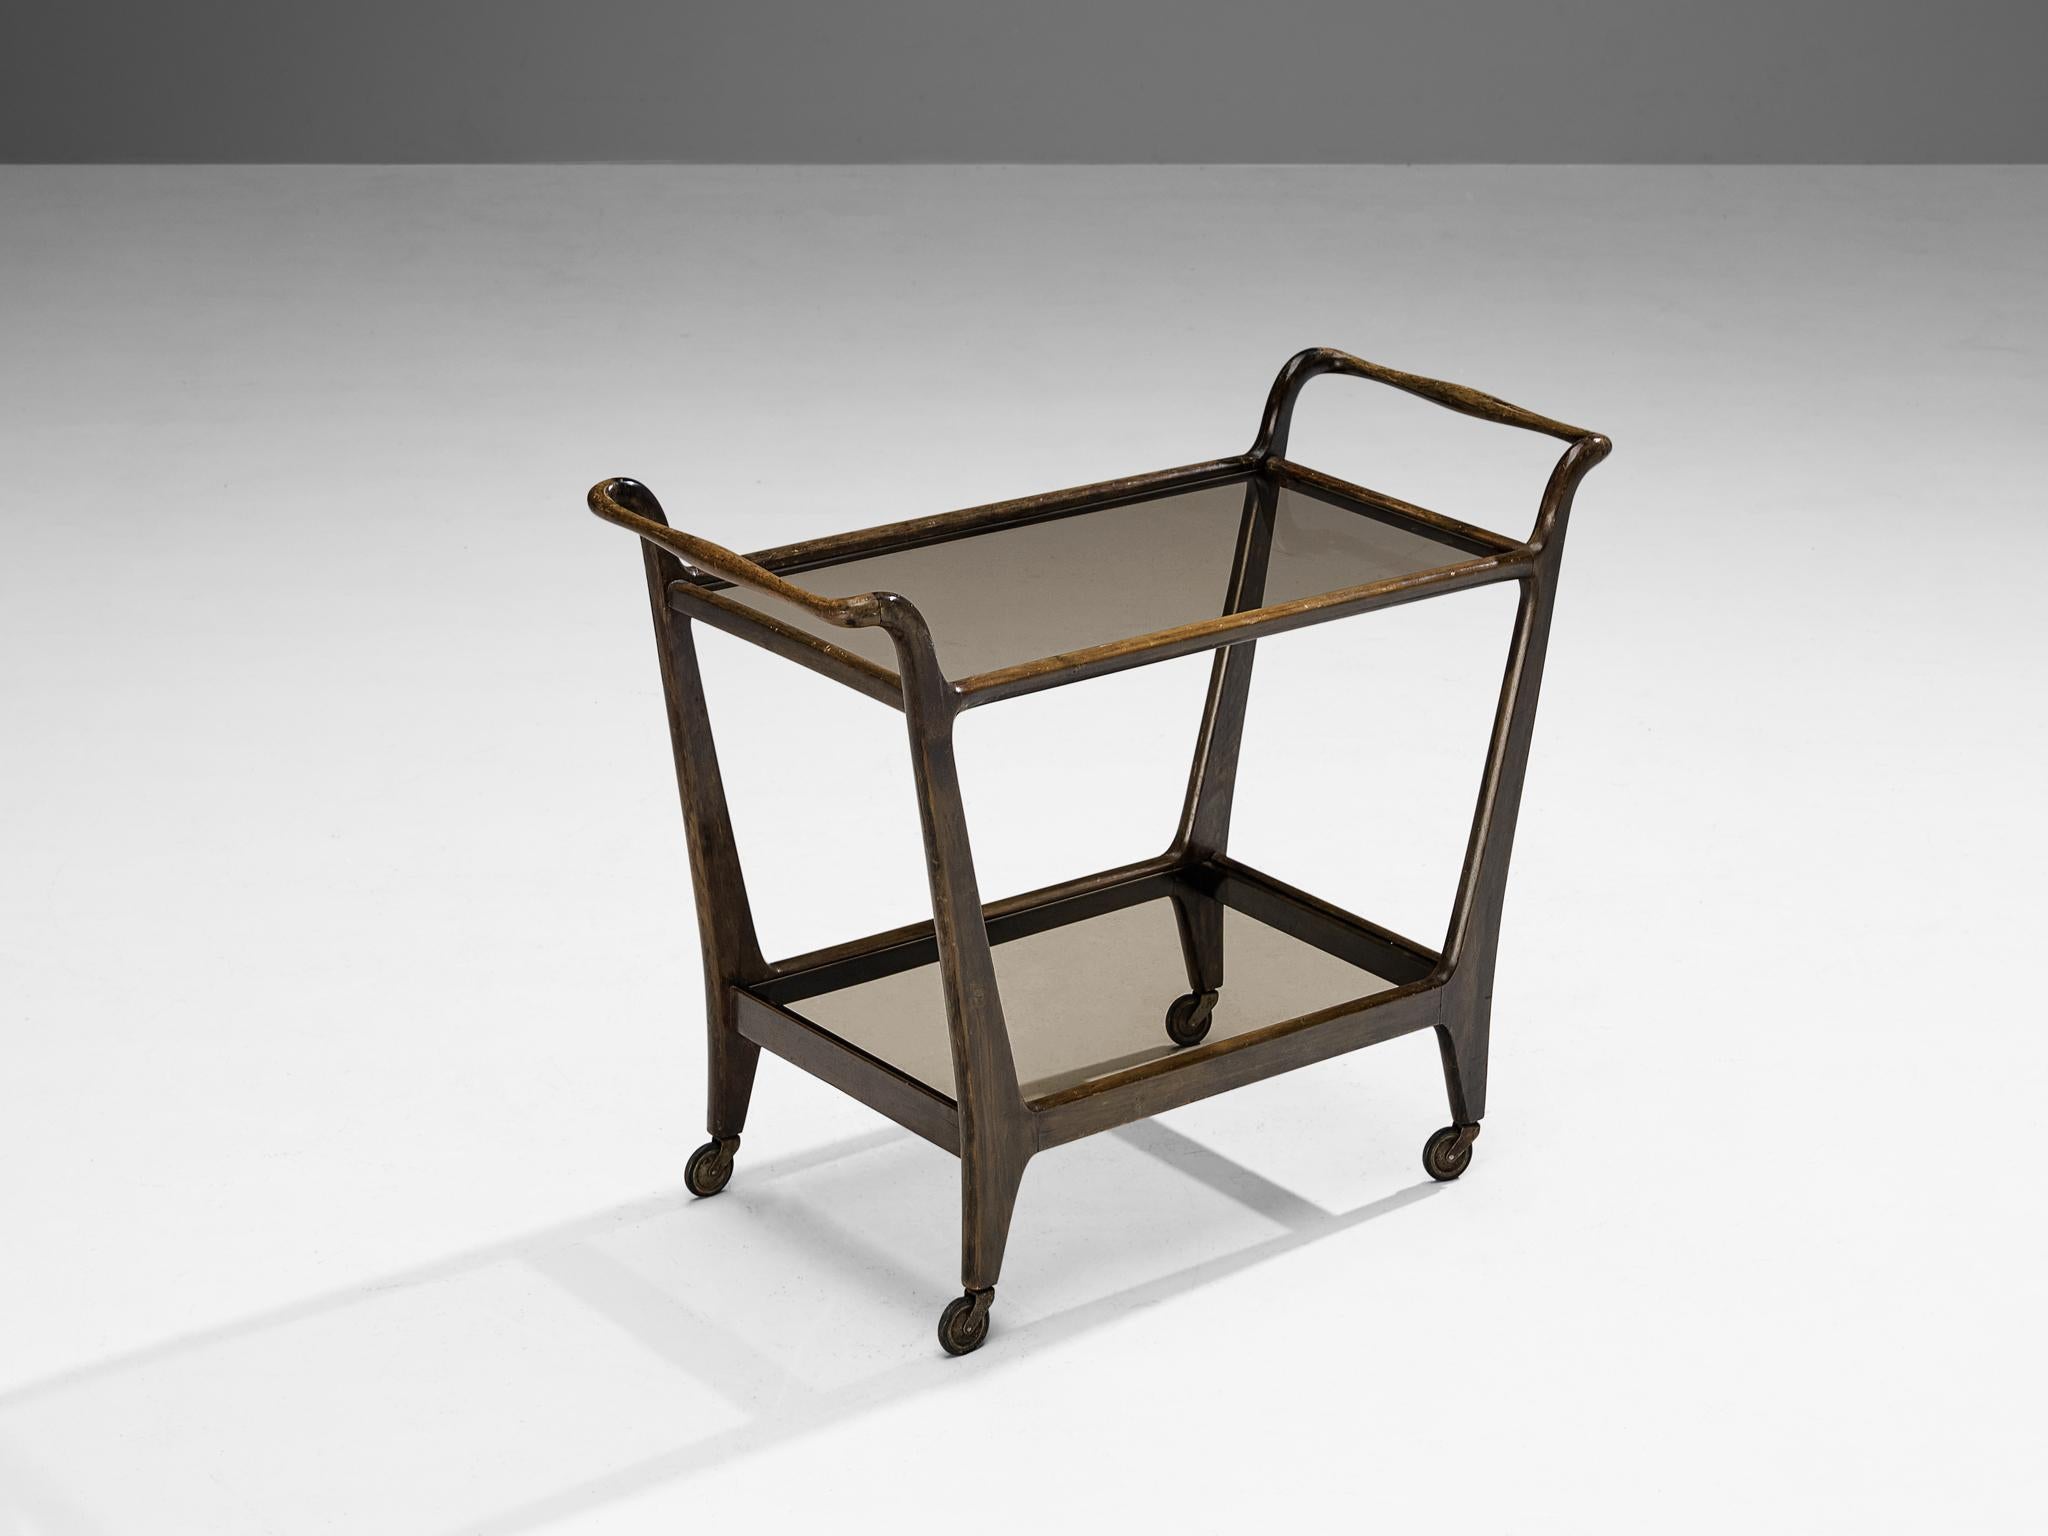 Bar cart or tea trolley, wood, glass, metal, Europe

Bar cart or serving trolley made in wood and displaying two smoked glass levels. This cart is made in the 1950s and shows delicate traits. The small and elegant wheels, the tapered handlebars